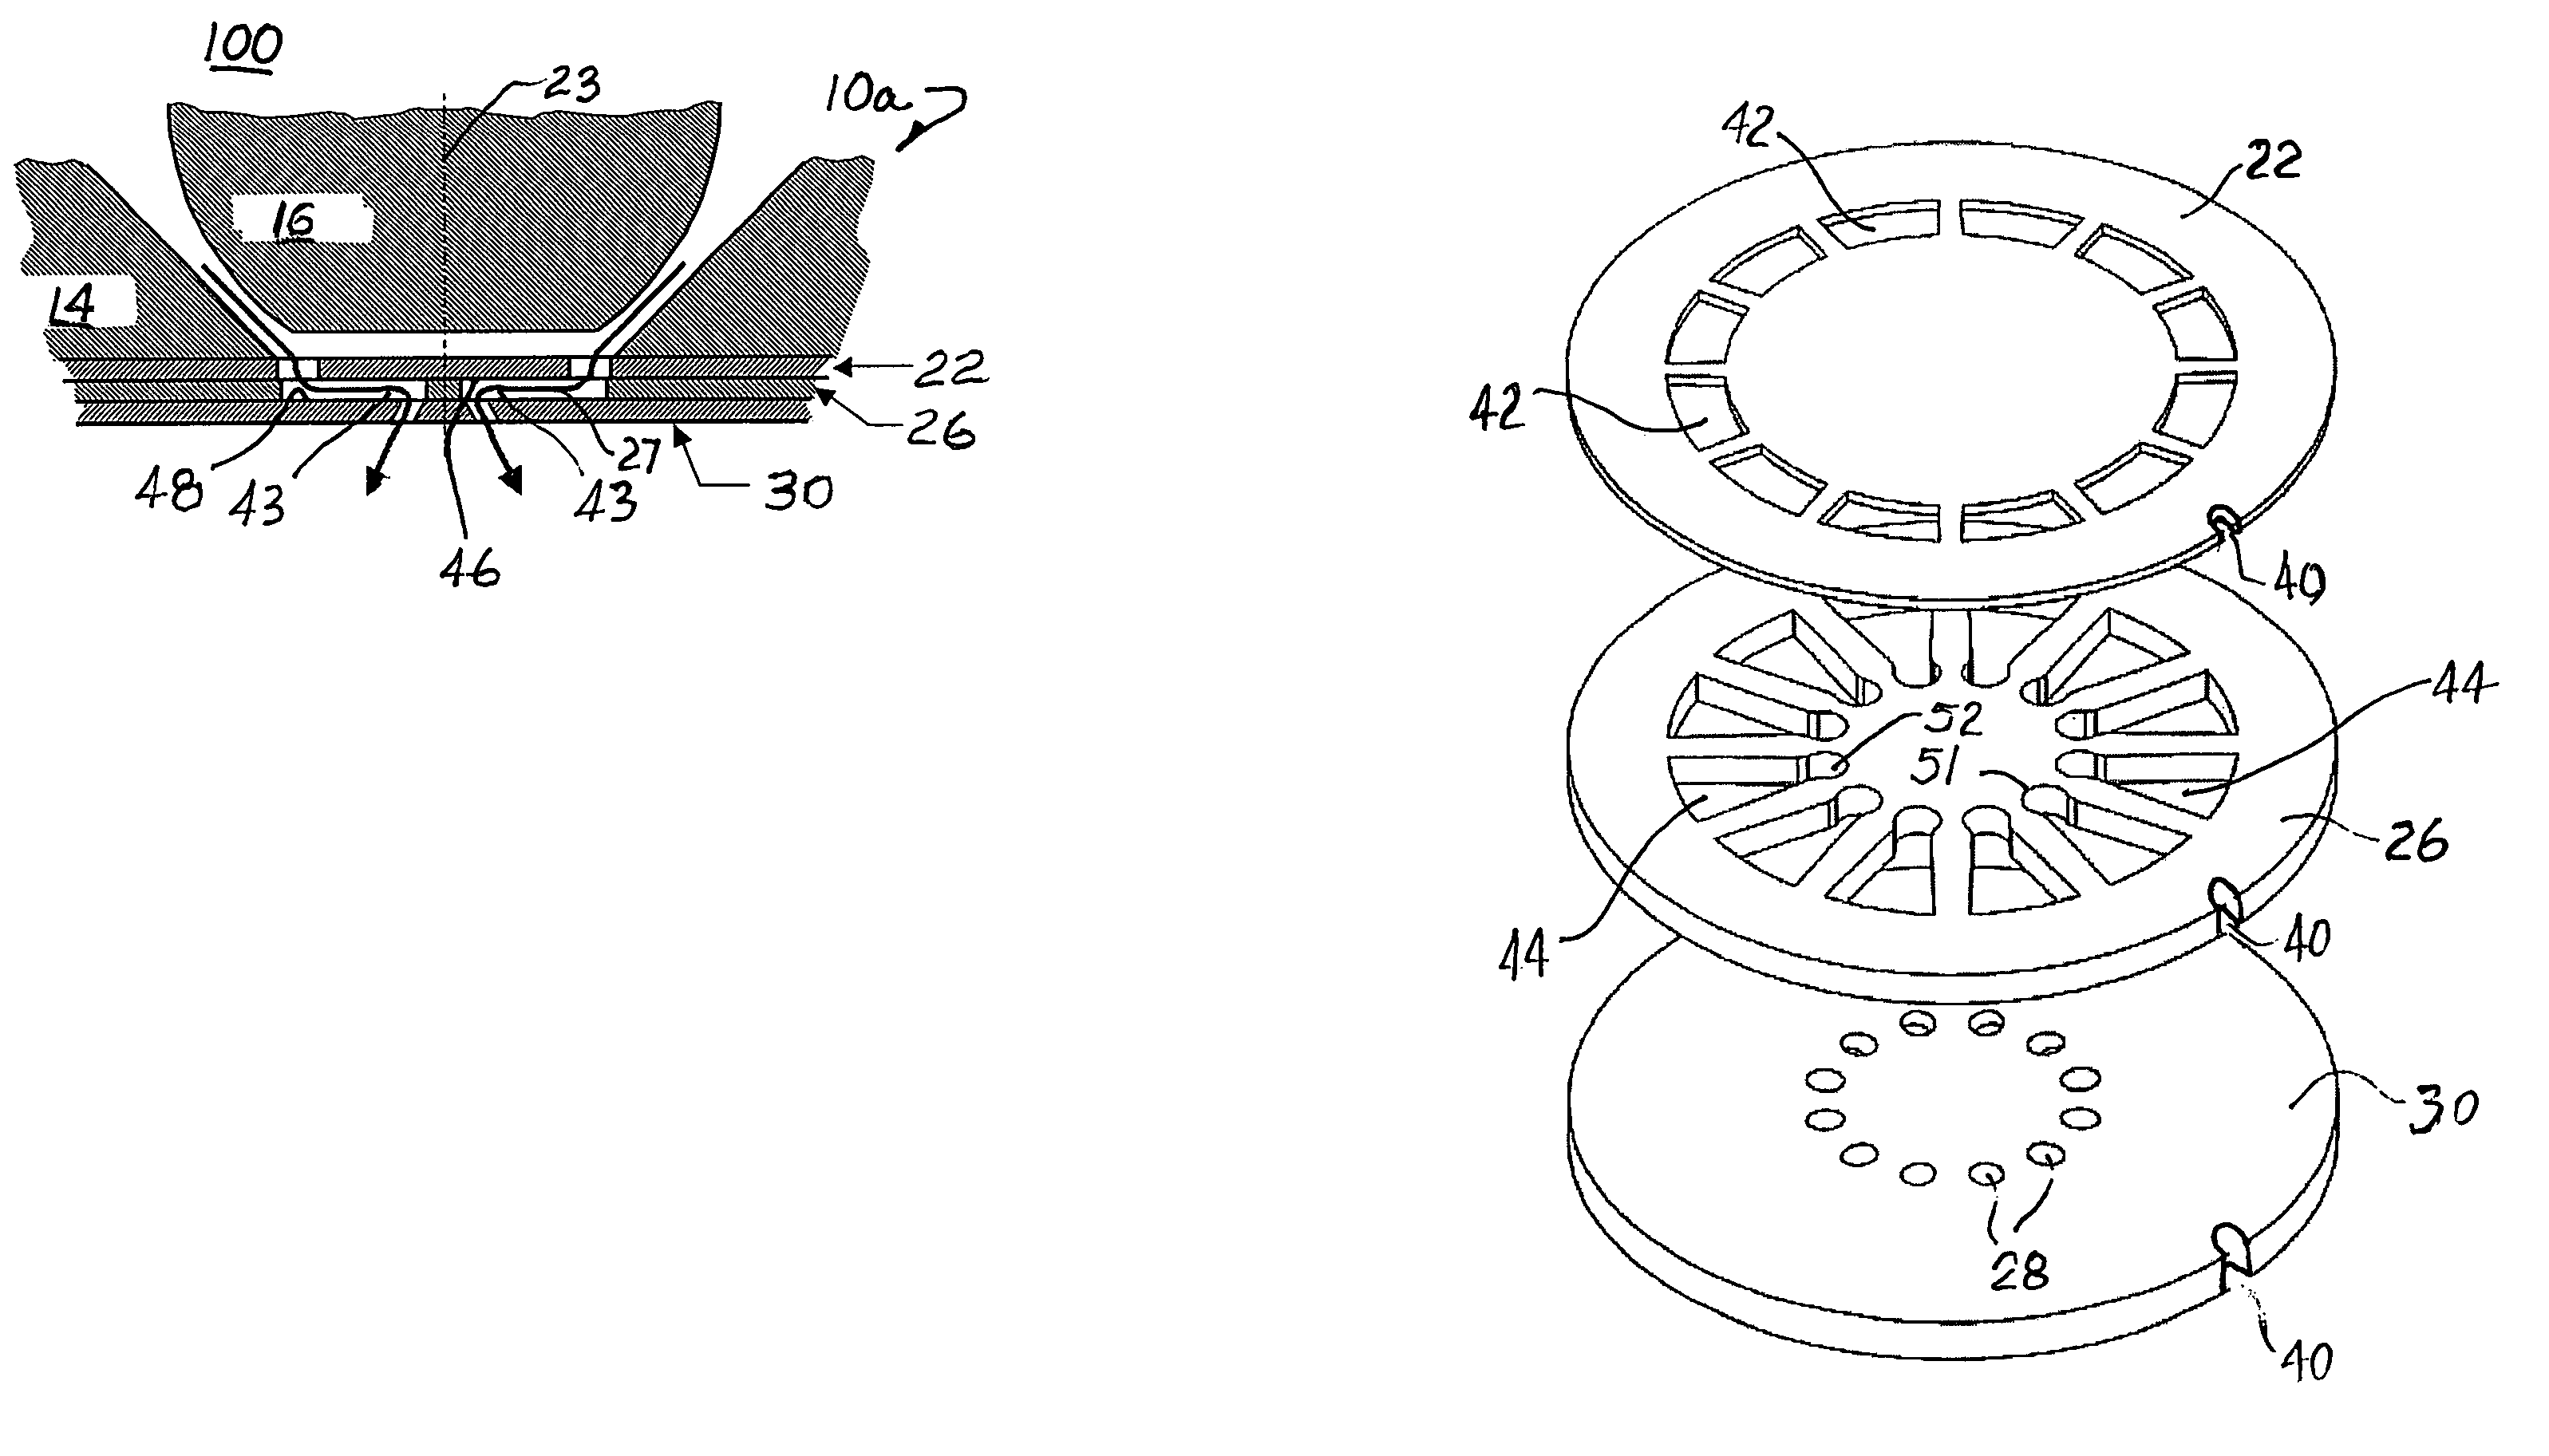 Fuel injector nozzle atomizer having individual passages for inward directed accelerated cross-flow